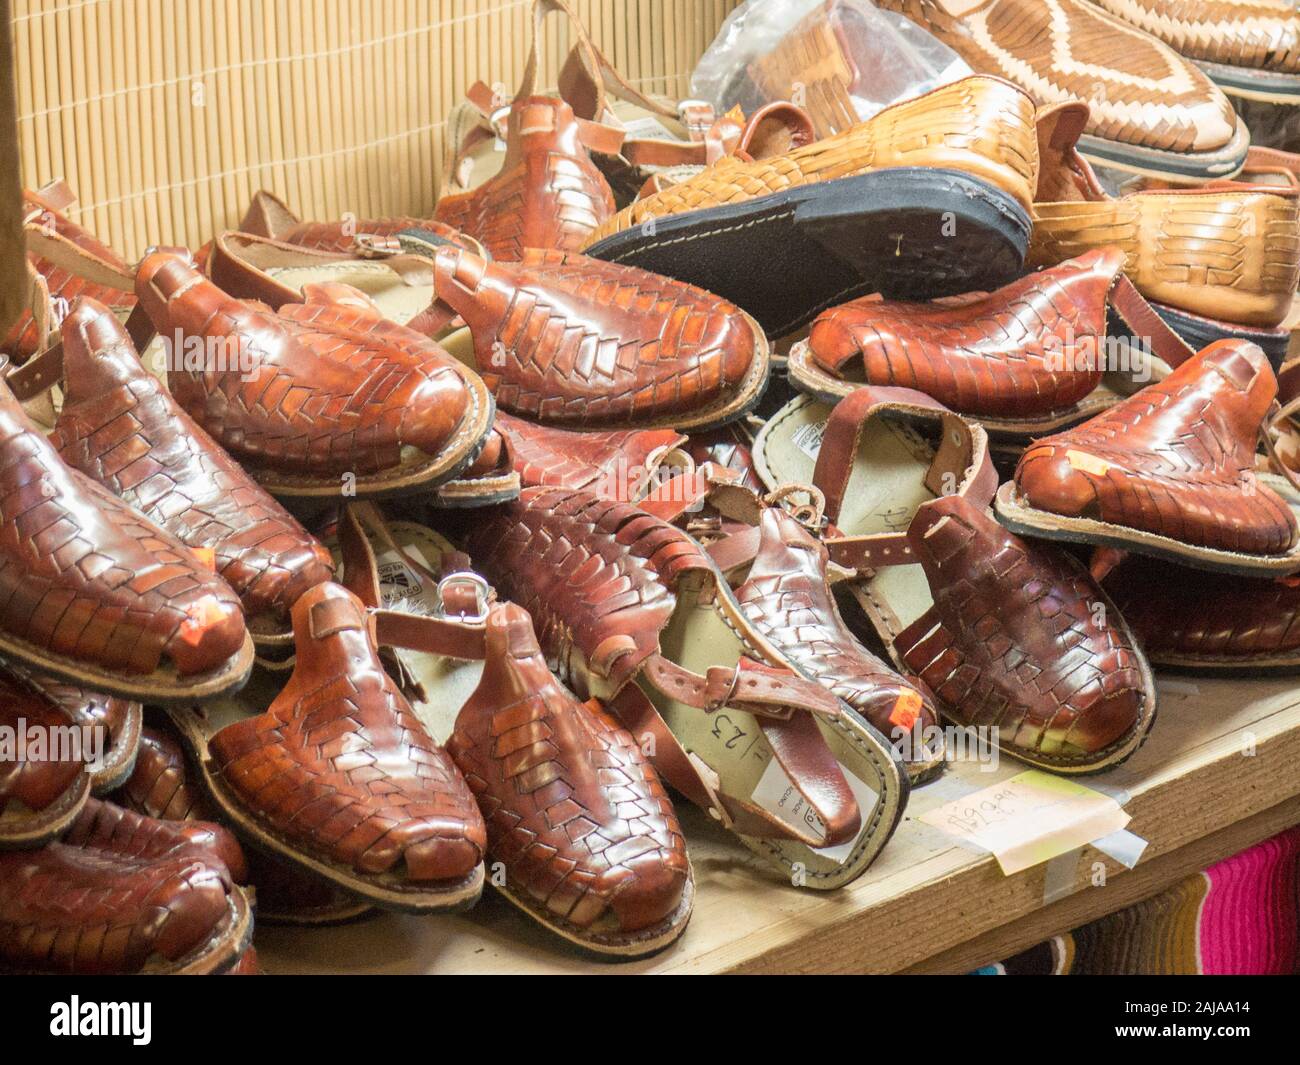 Mexican Huarache style shoes and sandals for sale in Mercado, San Antonio, Texas Stock Photo